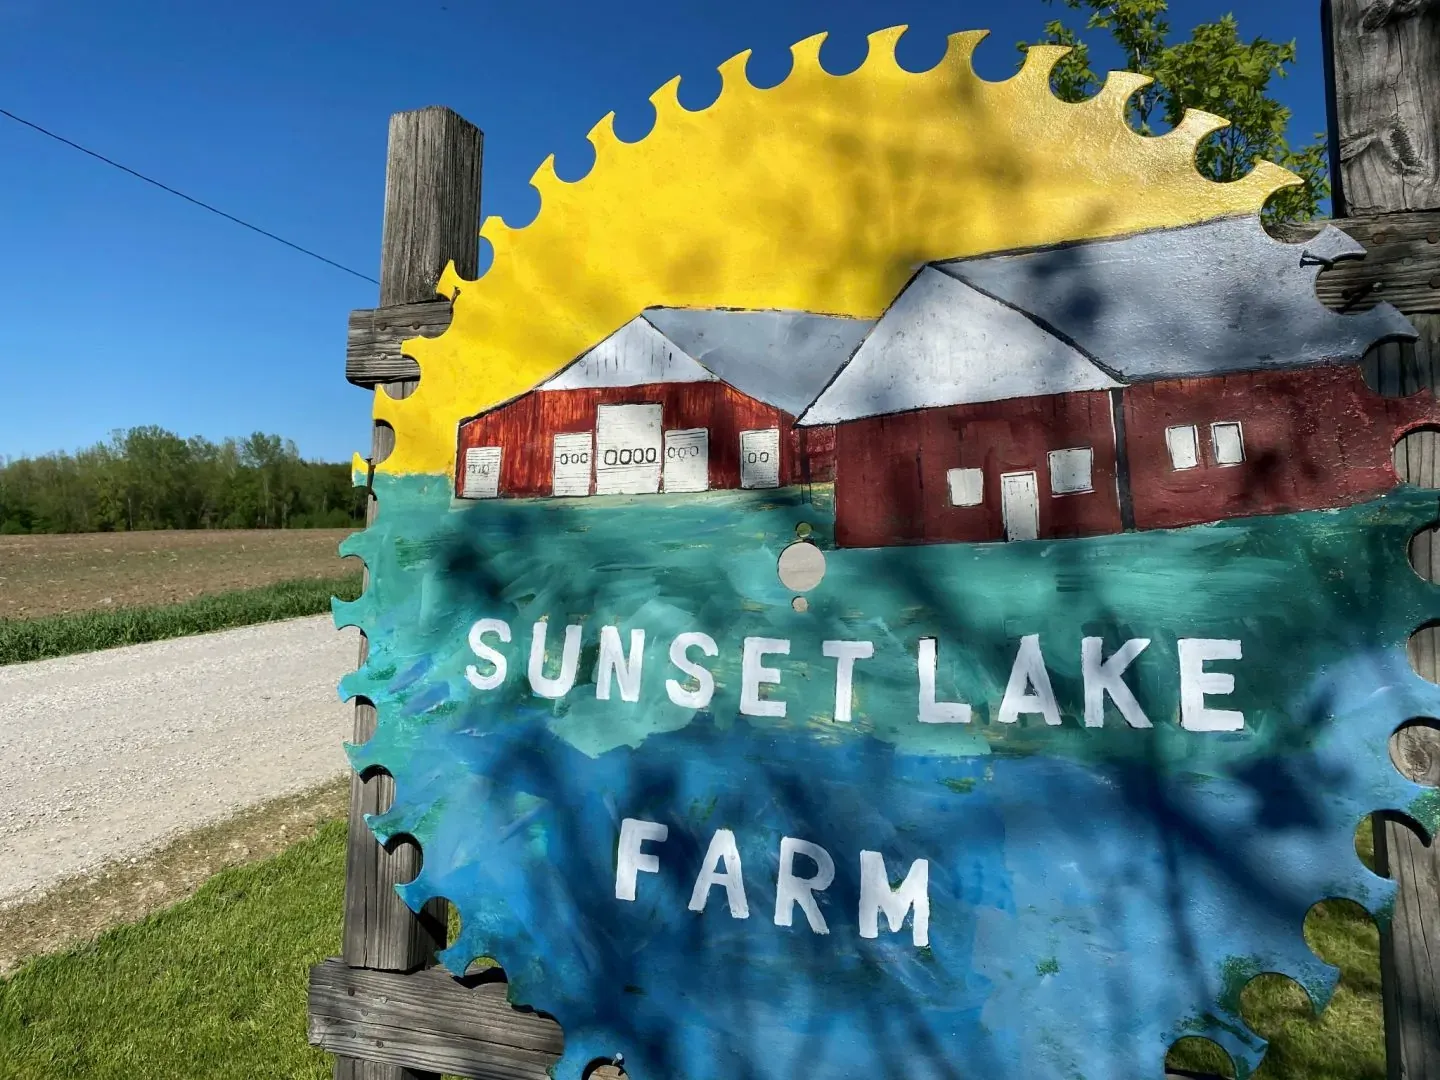 Sunset Lake Farm sign painted on a large saw blade